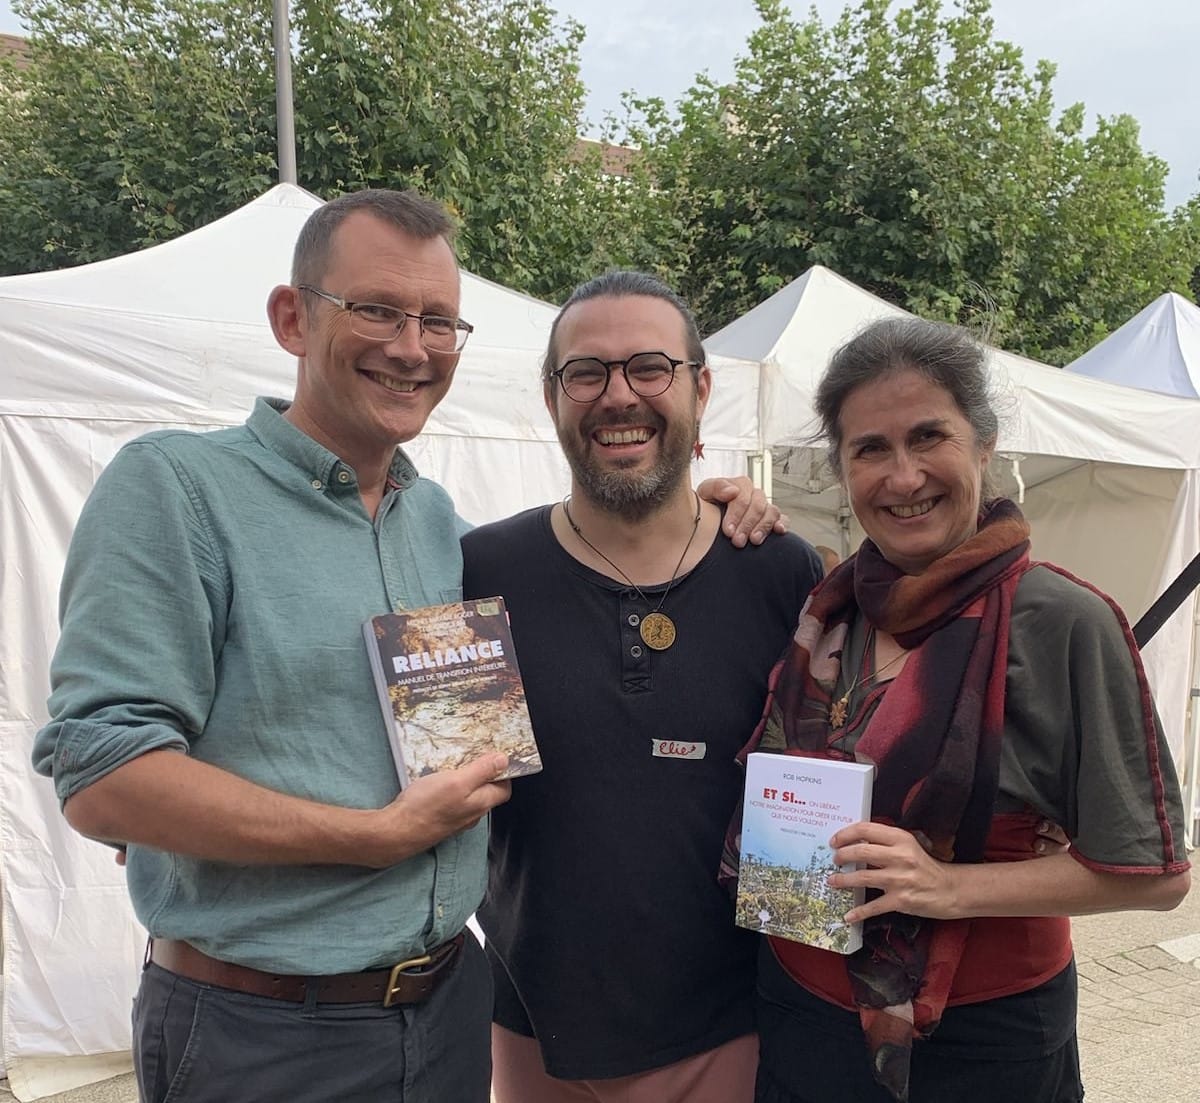 Rob Hopkins, Elie Wattelet and Tylie Grosjean exchanging their books